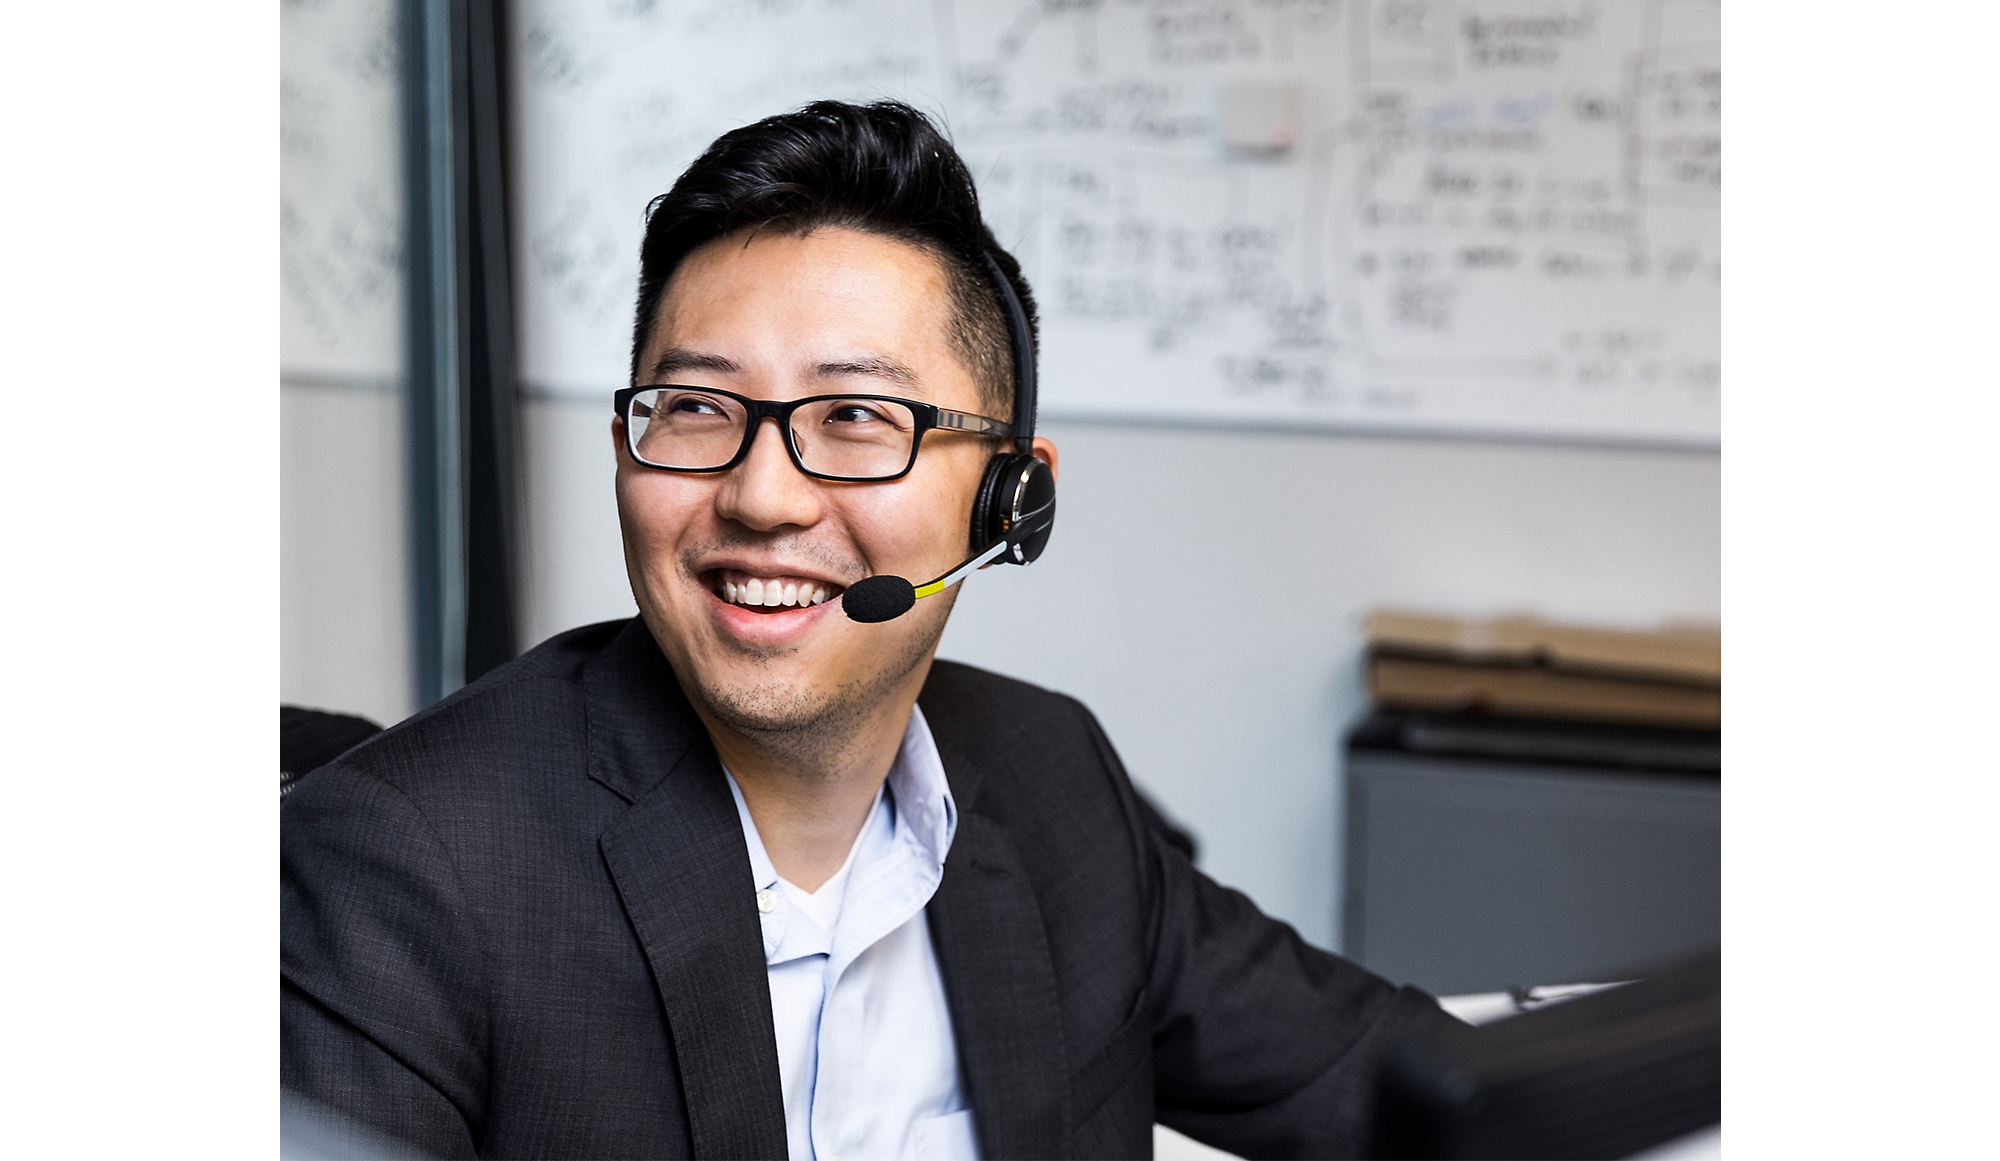 A person wearing spectacle smiling and using headphones